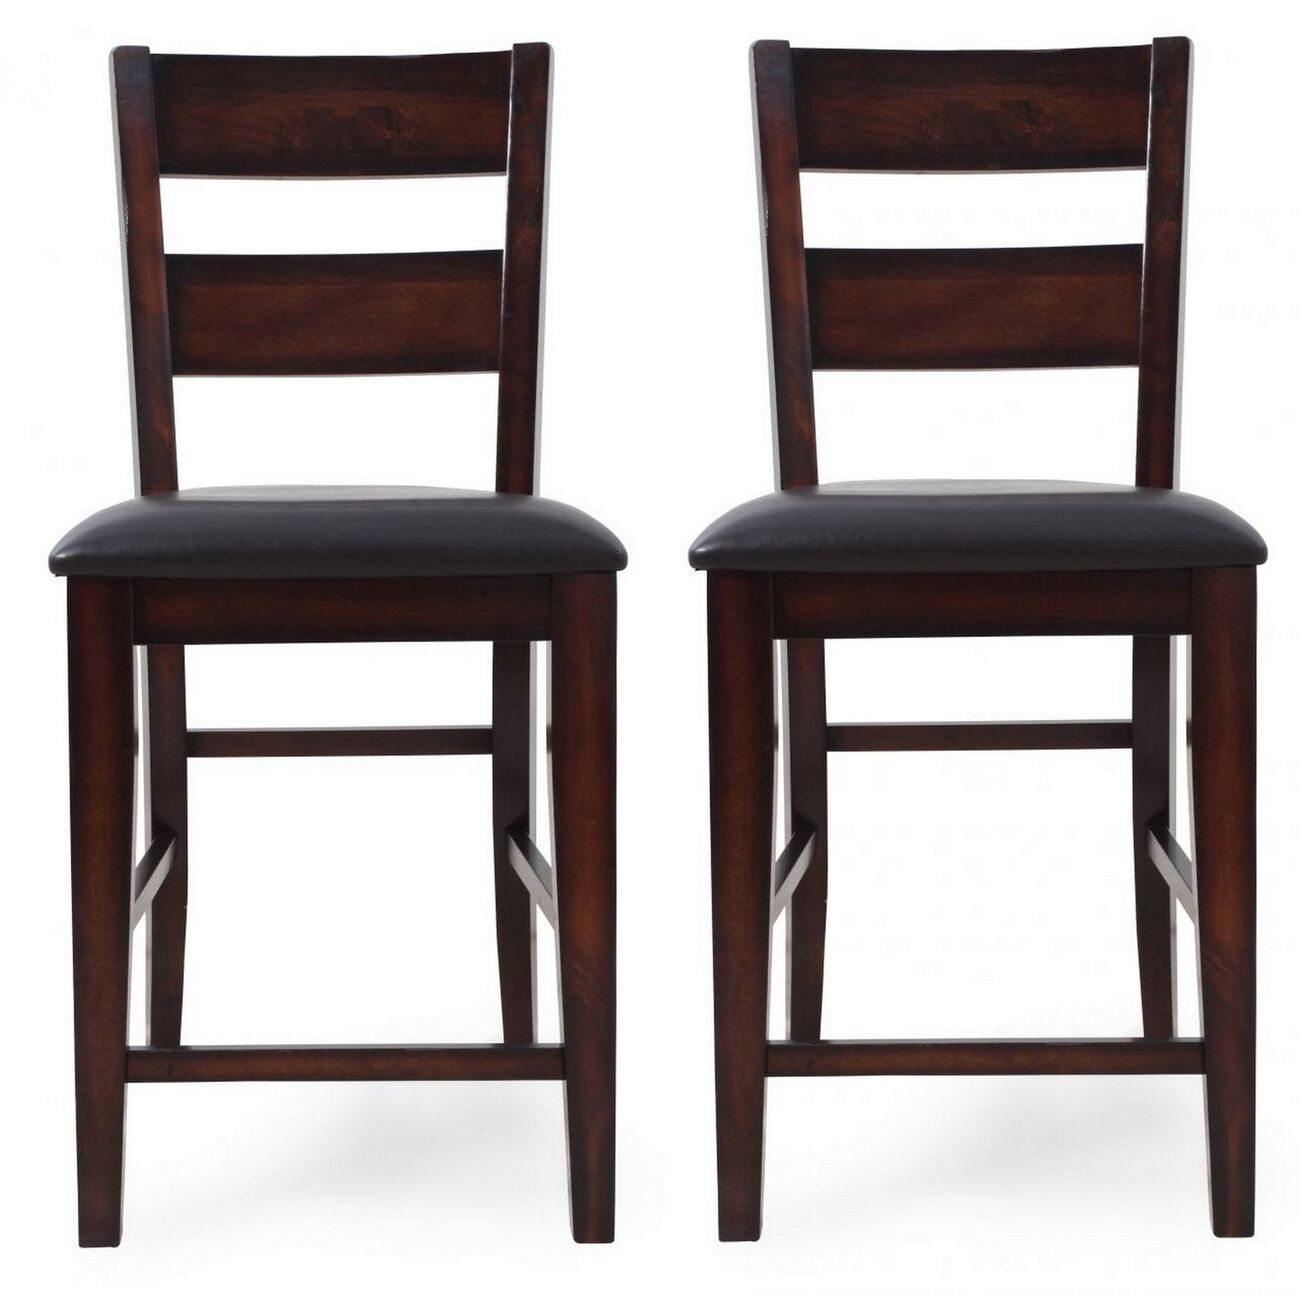 Wooden Leatherette Seat Counter Chair with Cut Out Back, Set of 2, Brown